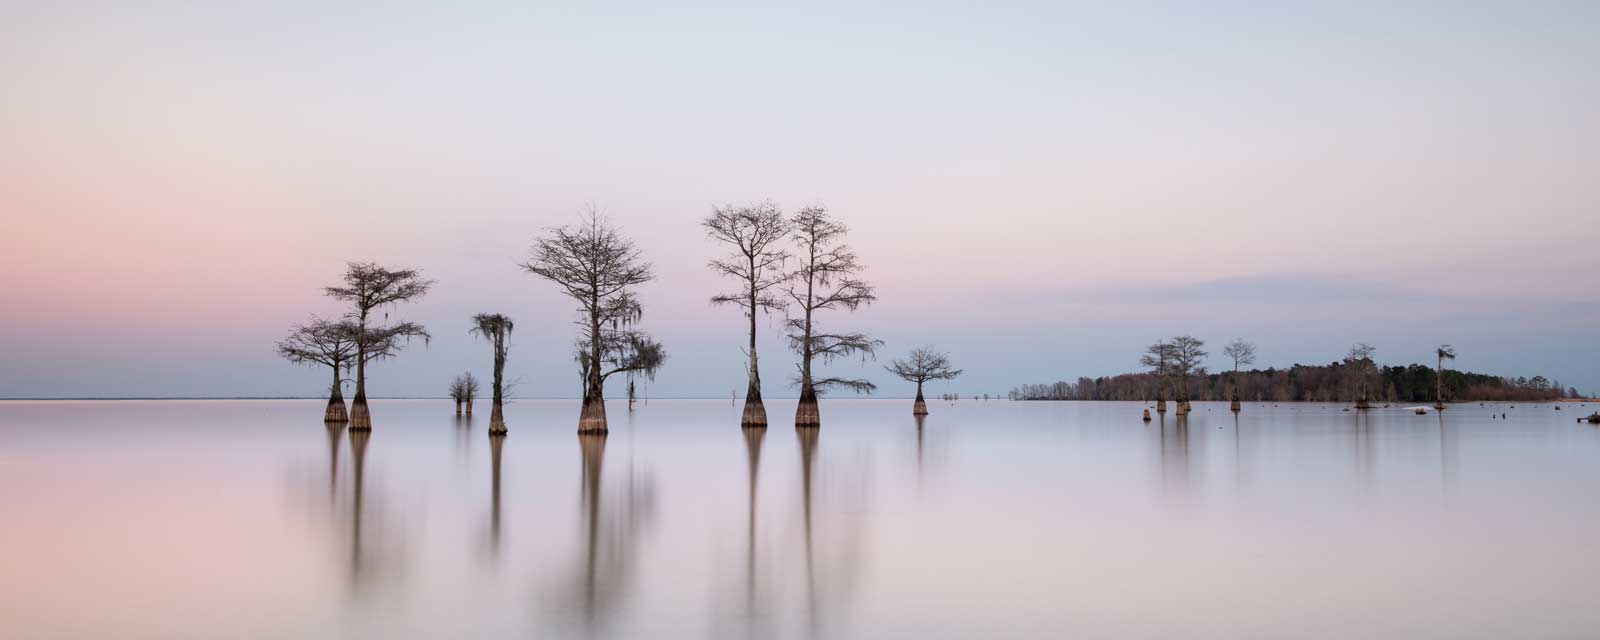 Ivo Kerssemakers, Winter Cypress V, Limited Edition, up to 72x40